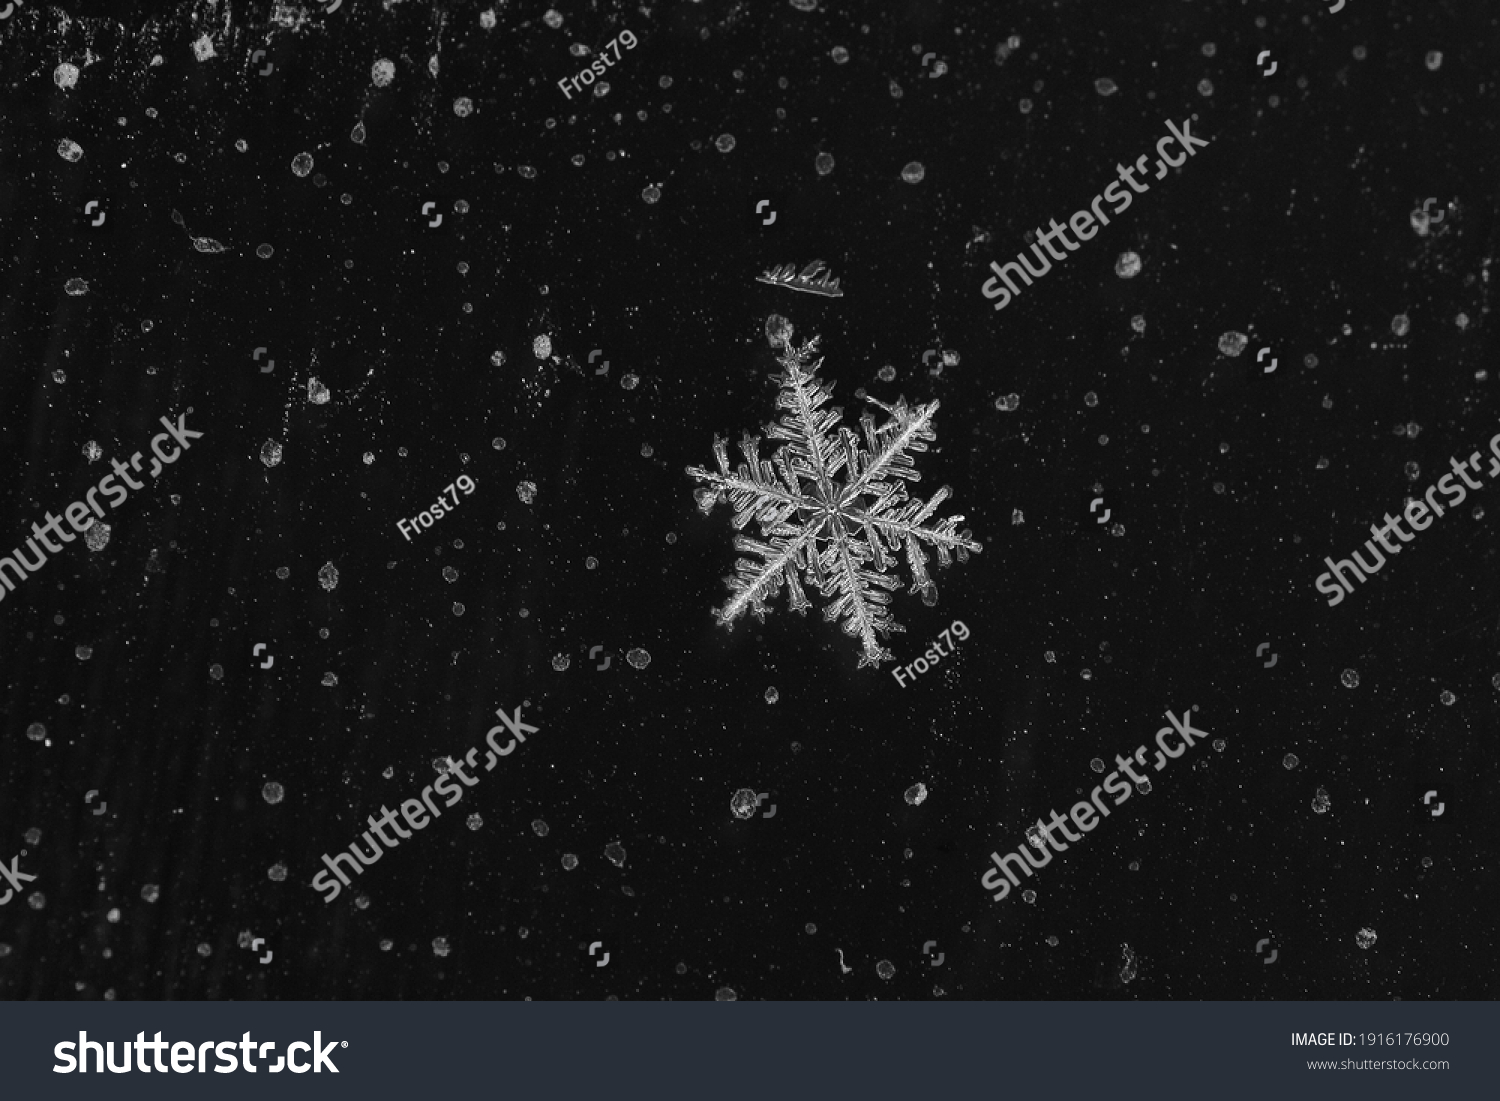 Winter snowflakes magnified. Snowflakes on a dark background. #1916176900